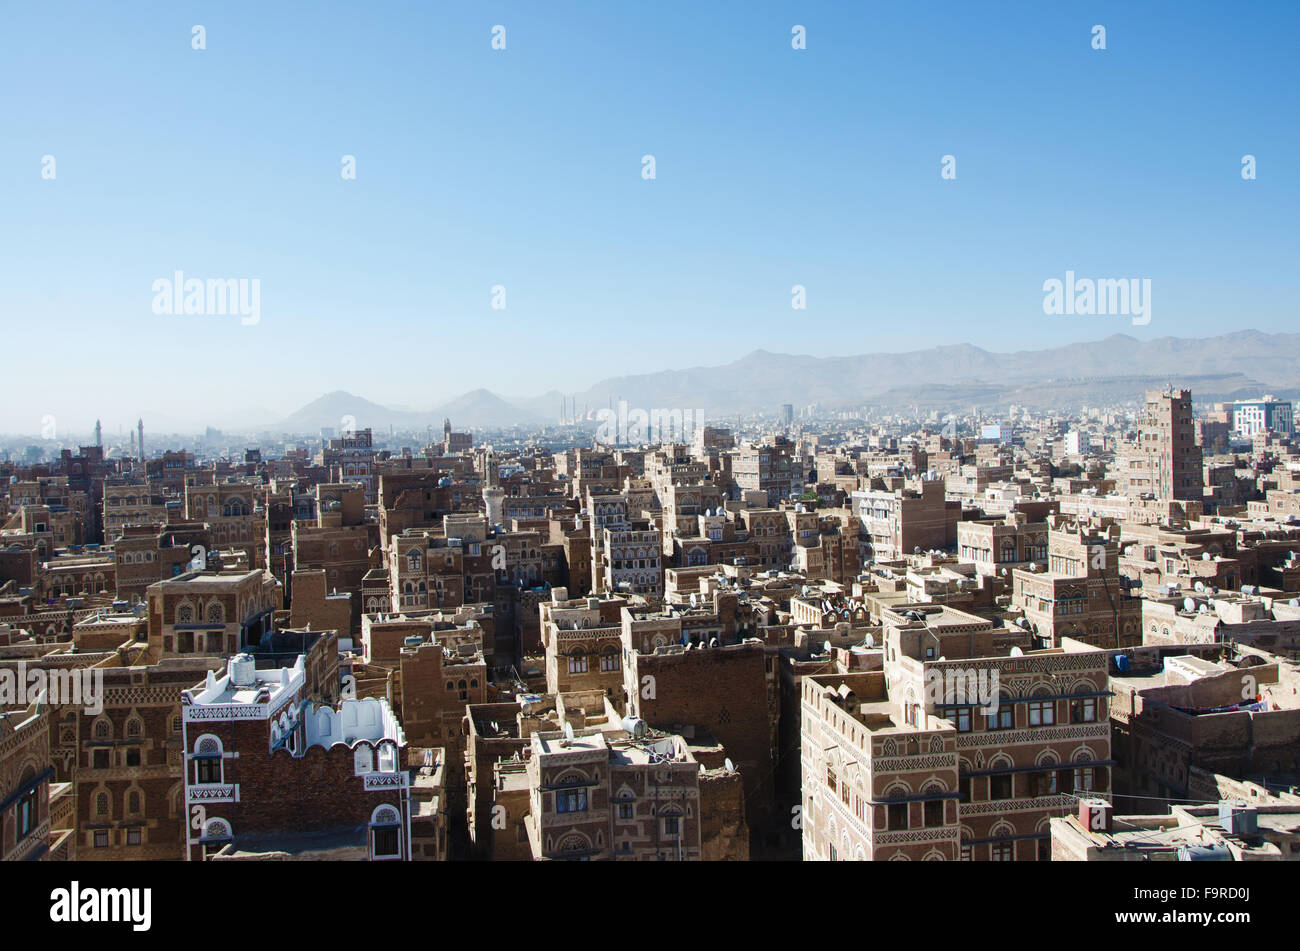 The Old City of Sana'a, the oldest continuously inhabited and populated city in the world, Yemen, Unesco world heritage site Stock Photo